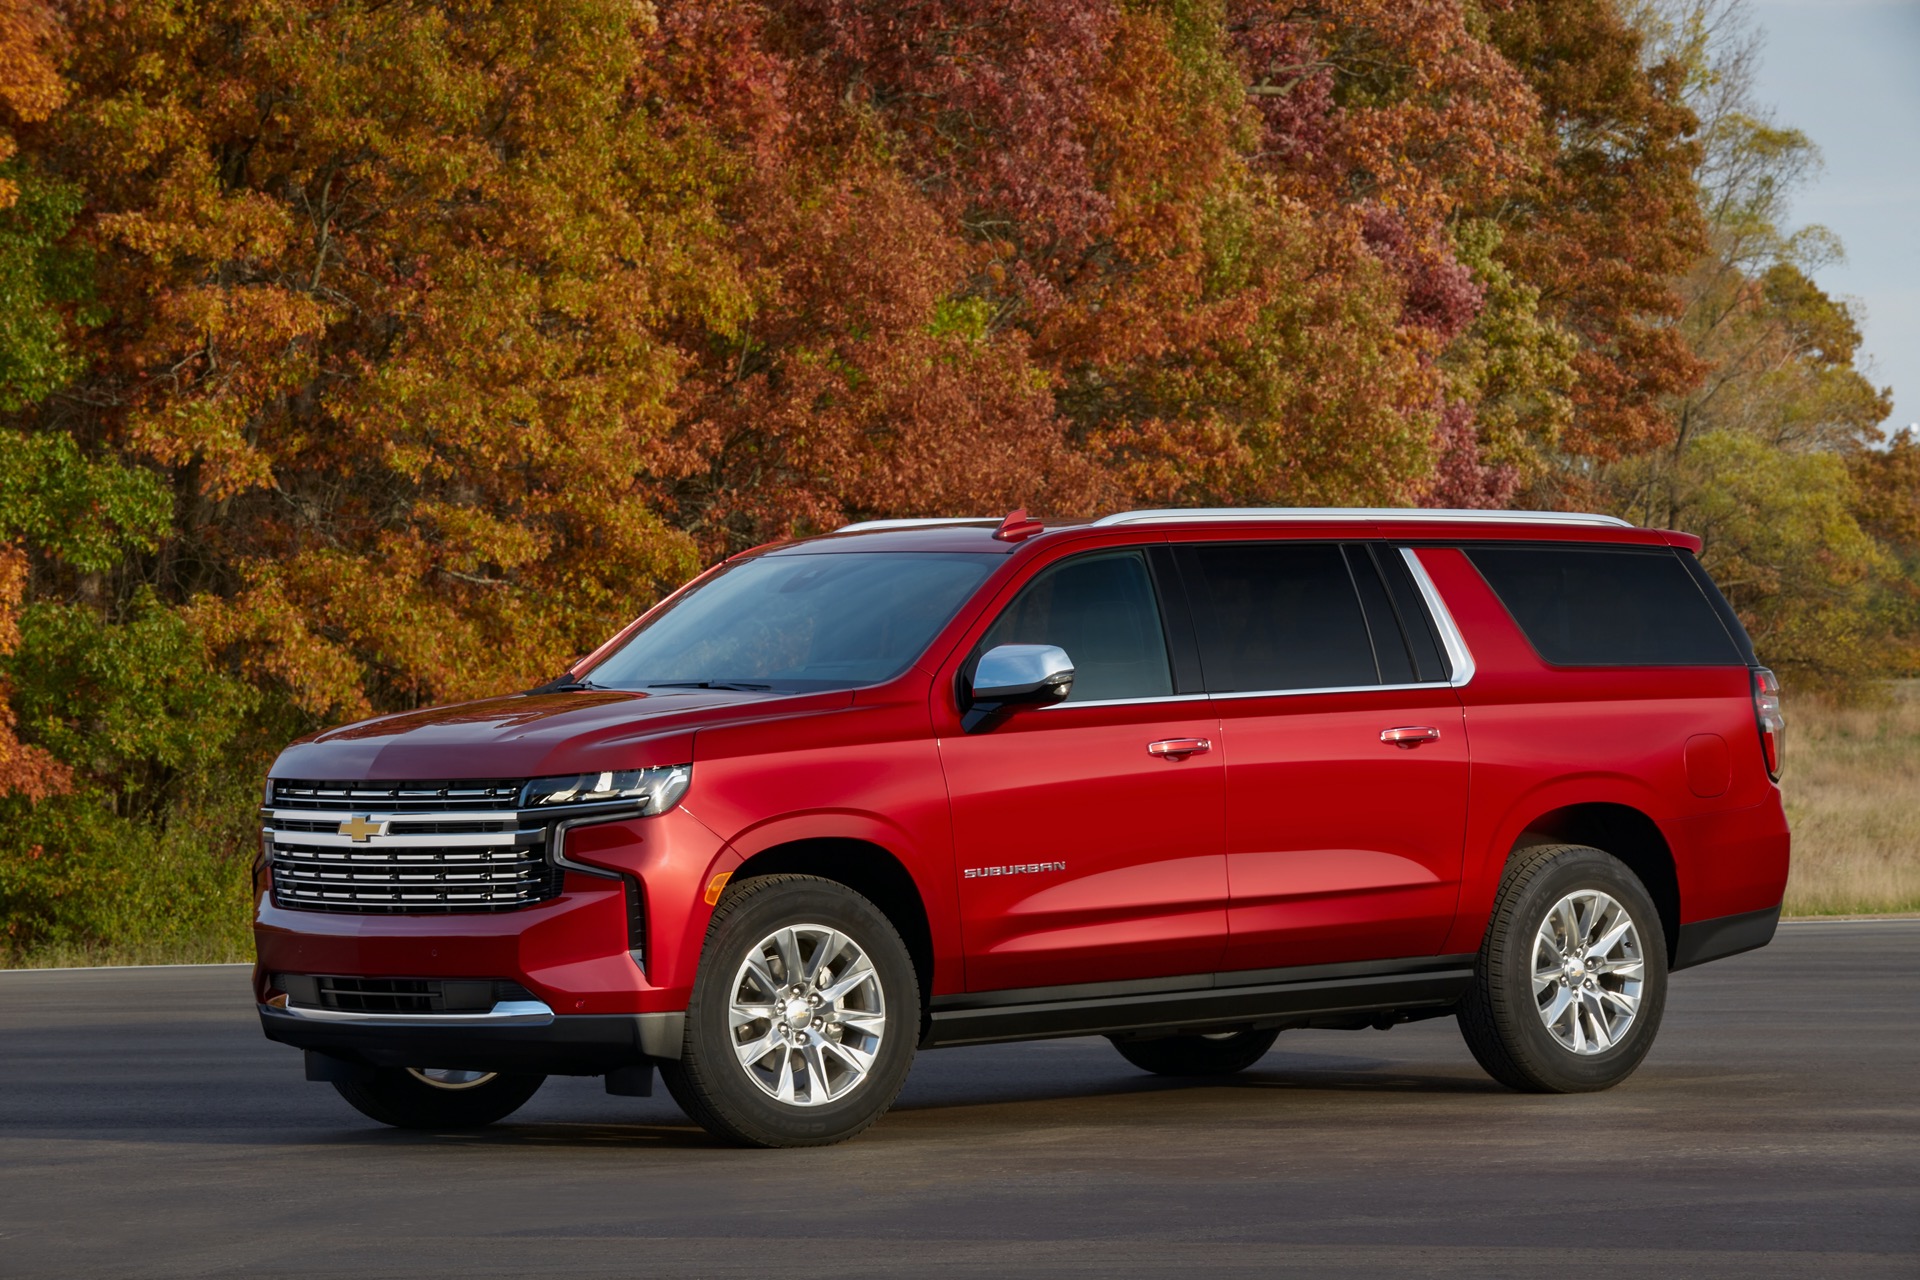 New and Used Chevrolet Suburban (Chevy) Prices, Photos, Reviews, Specs